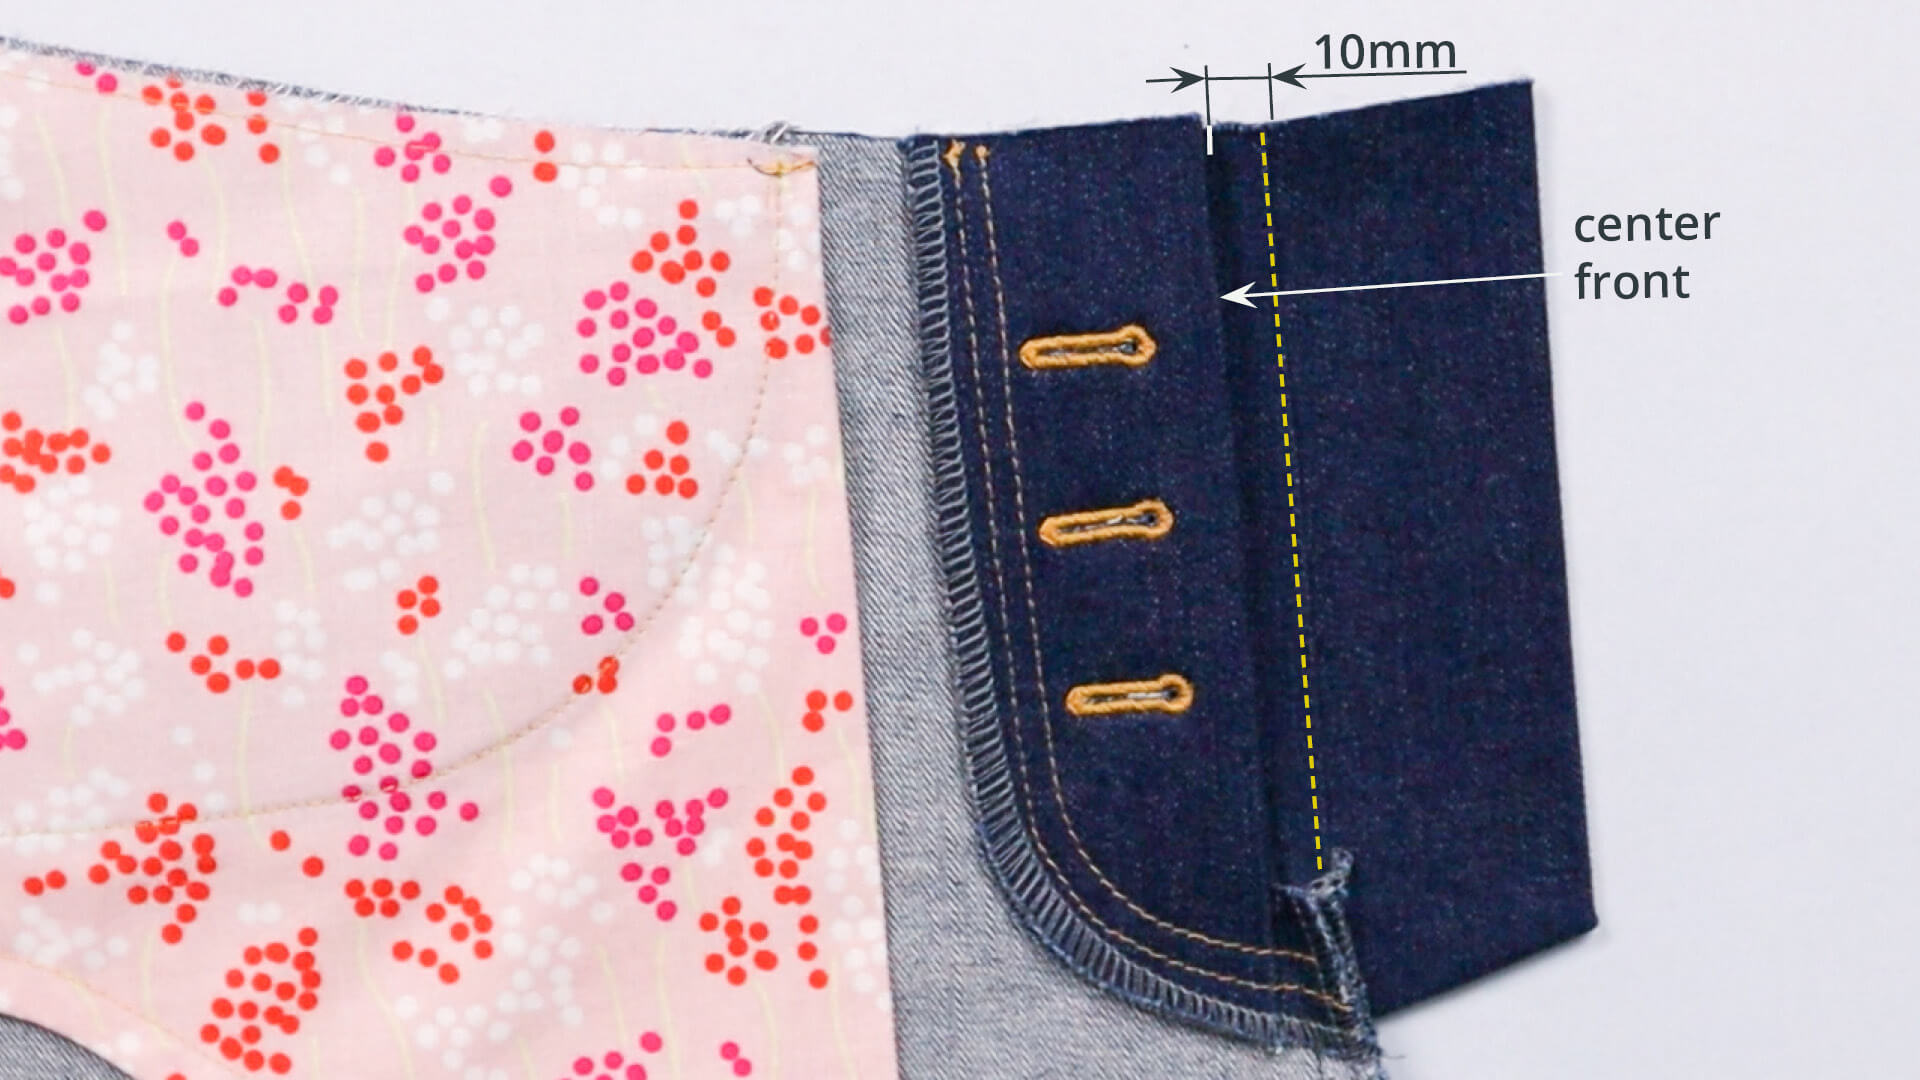 smartPATTERN sewing instructions for slit with concealed button placket on jeans - center front at 10 mm from the fly shield seam